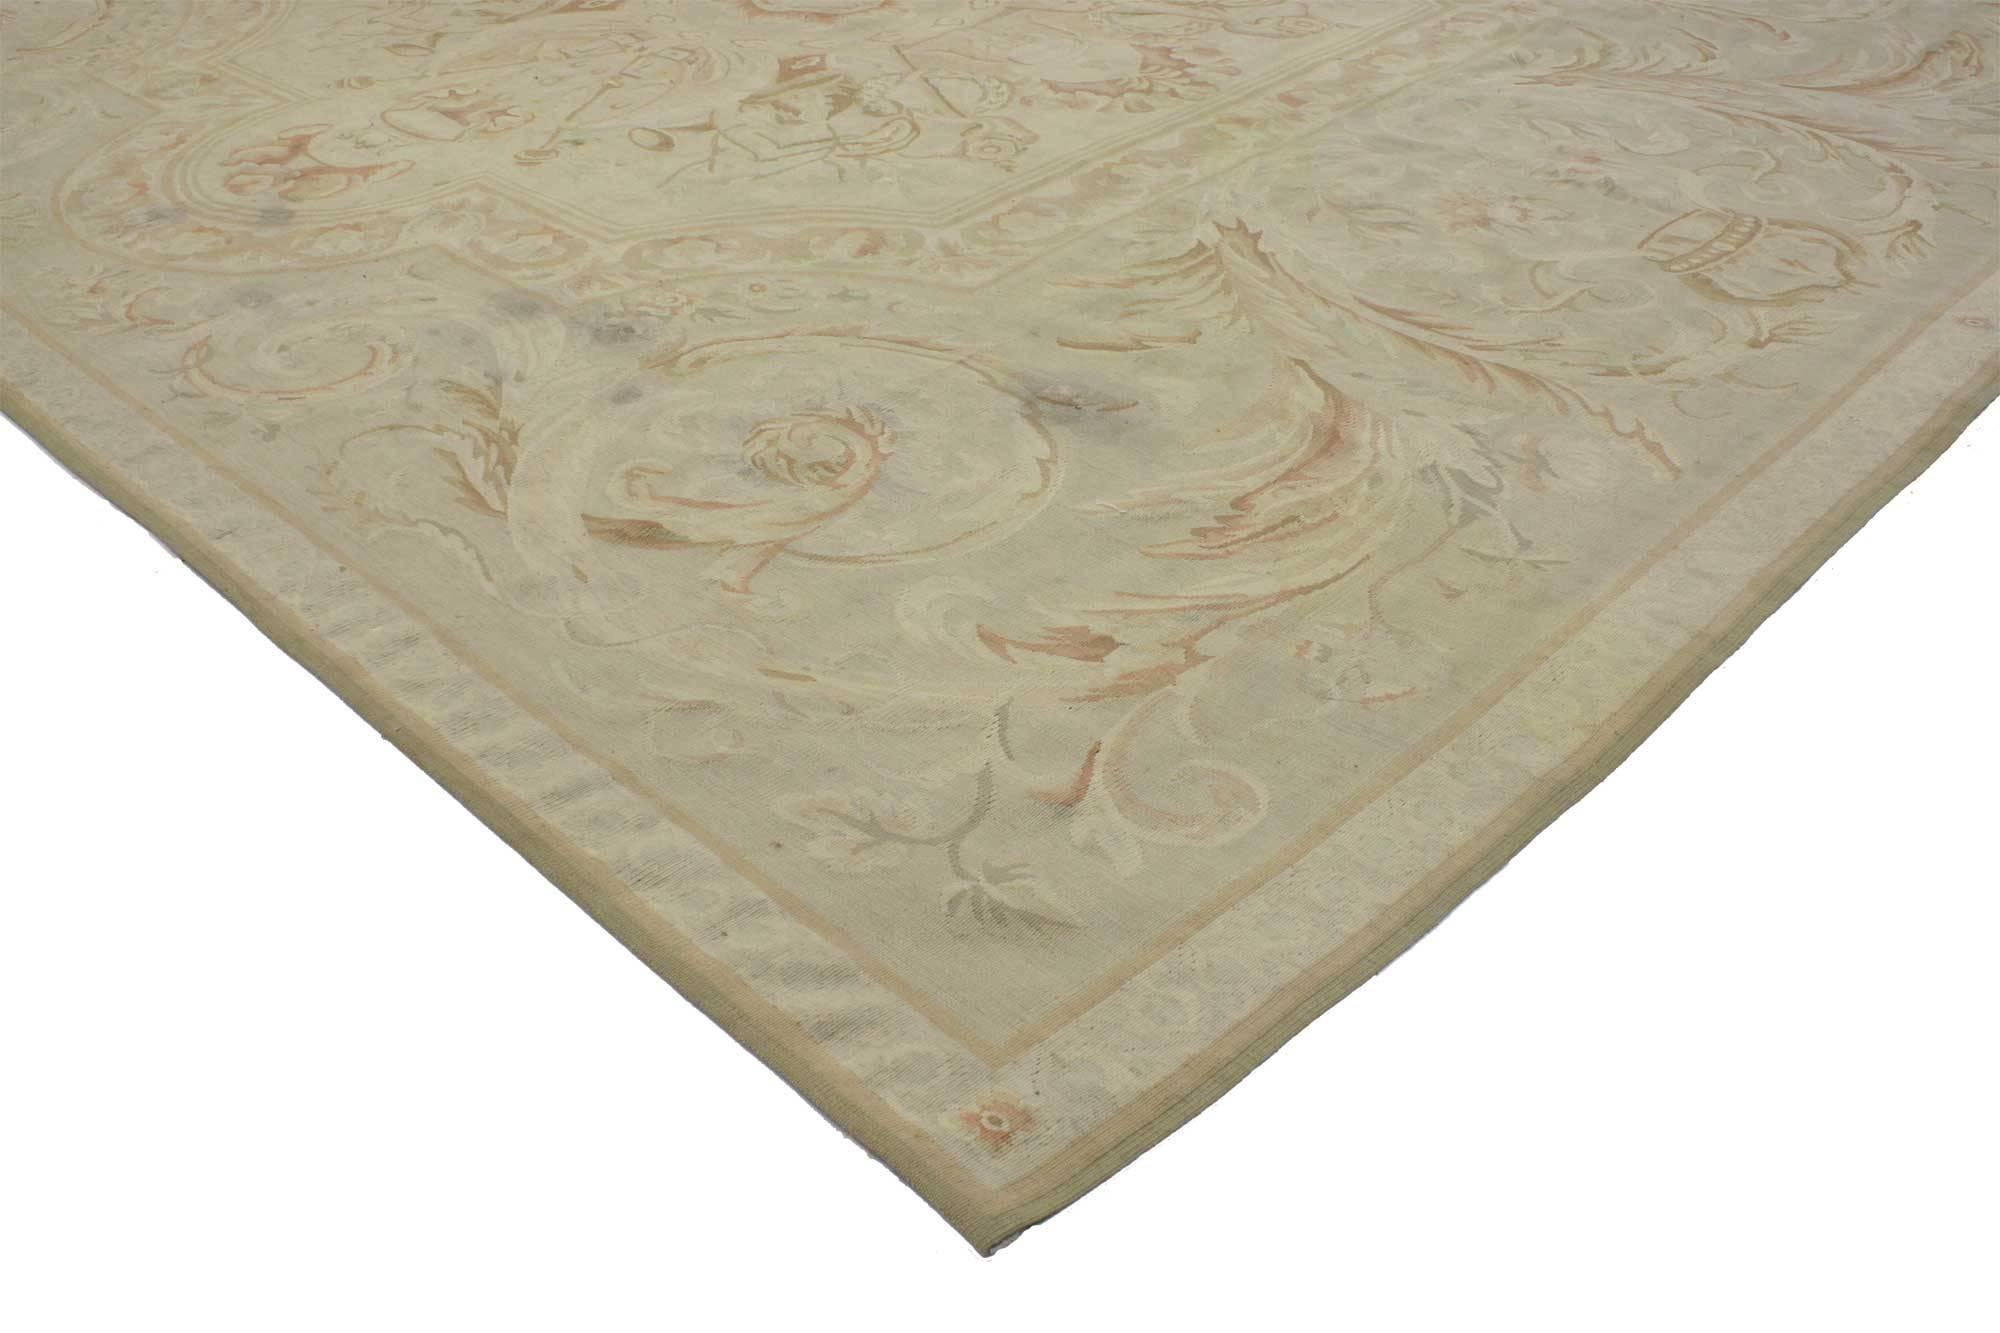 Vintage Aubusson French Provincial Chintz Style Area Rug with Rocaille Design In Fair Condition For Sale In Dallas, TX